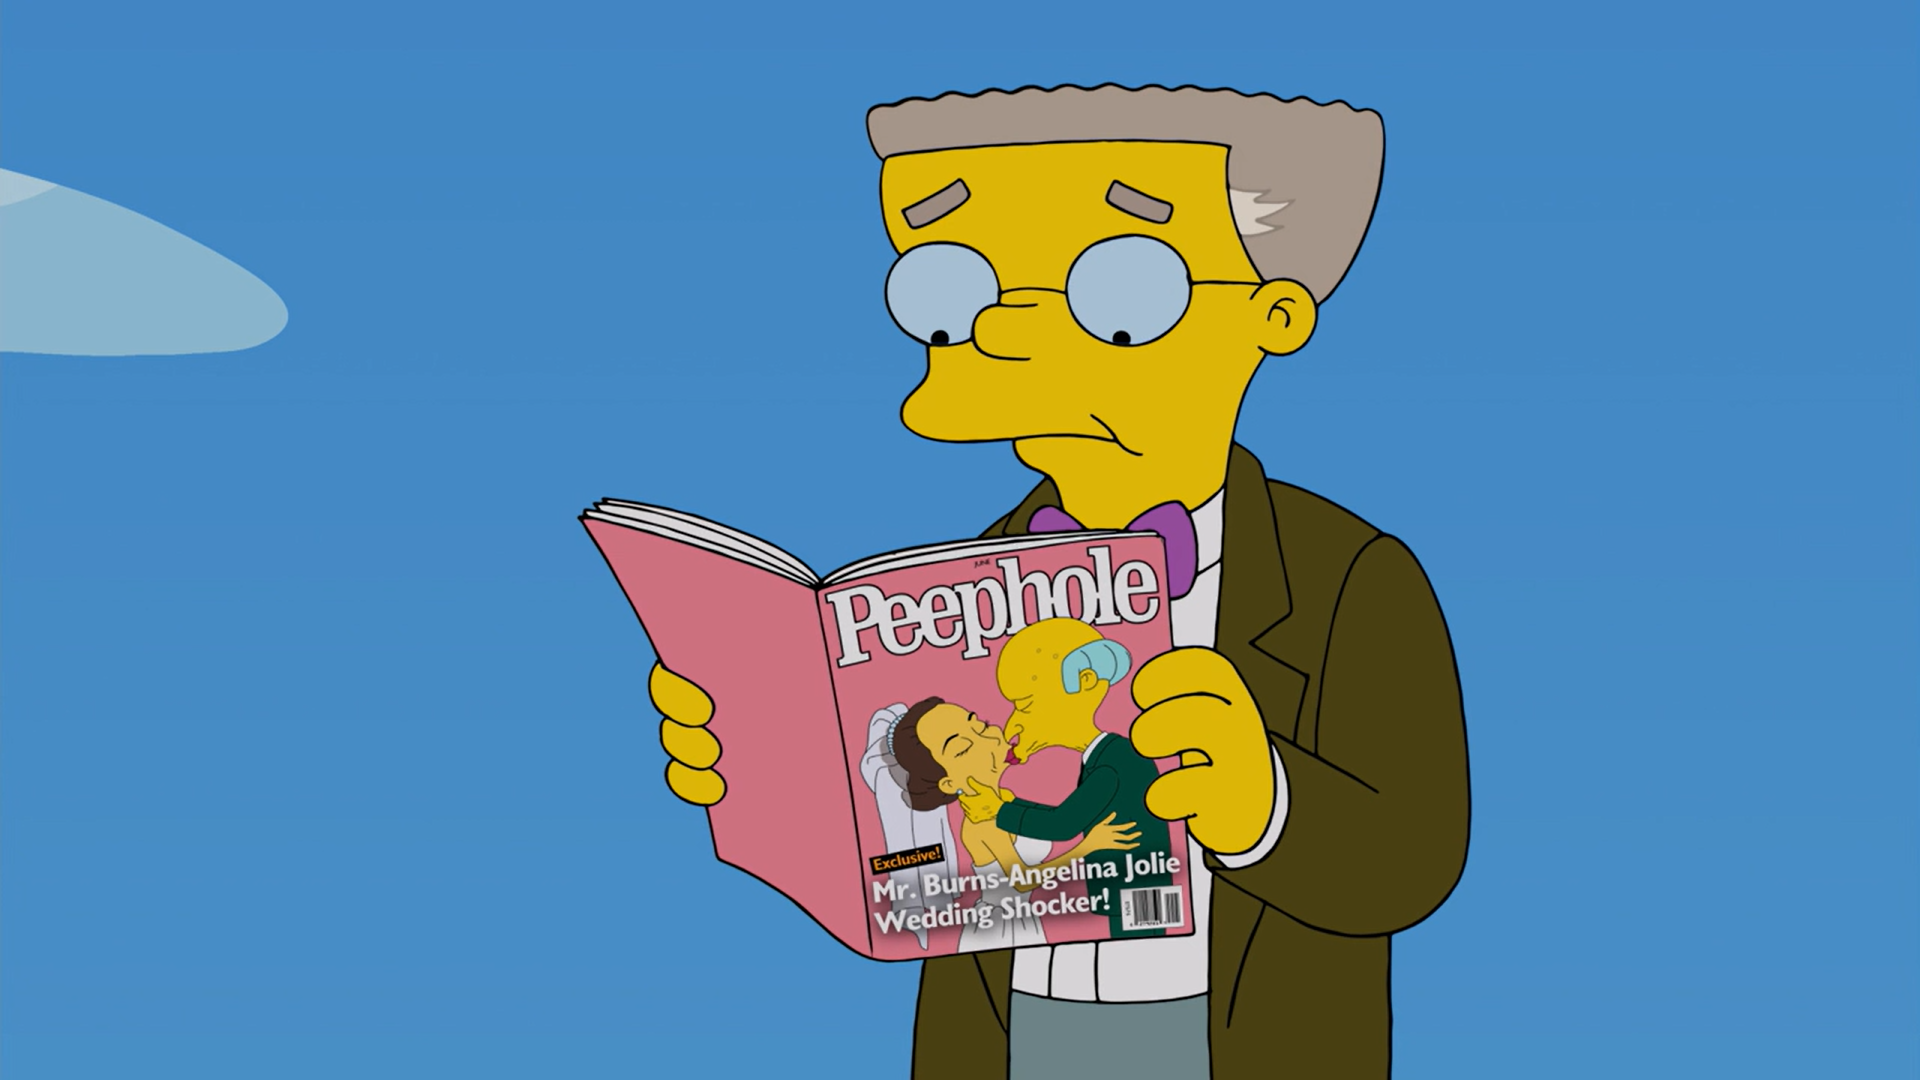 An older Smithers reading a Peephole magazine issue titled 'Mr. Burns-Angelina Jolie Wedding Shocker' with an image of Mr. Burns and Angelina Jolie kissing on the cover.